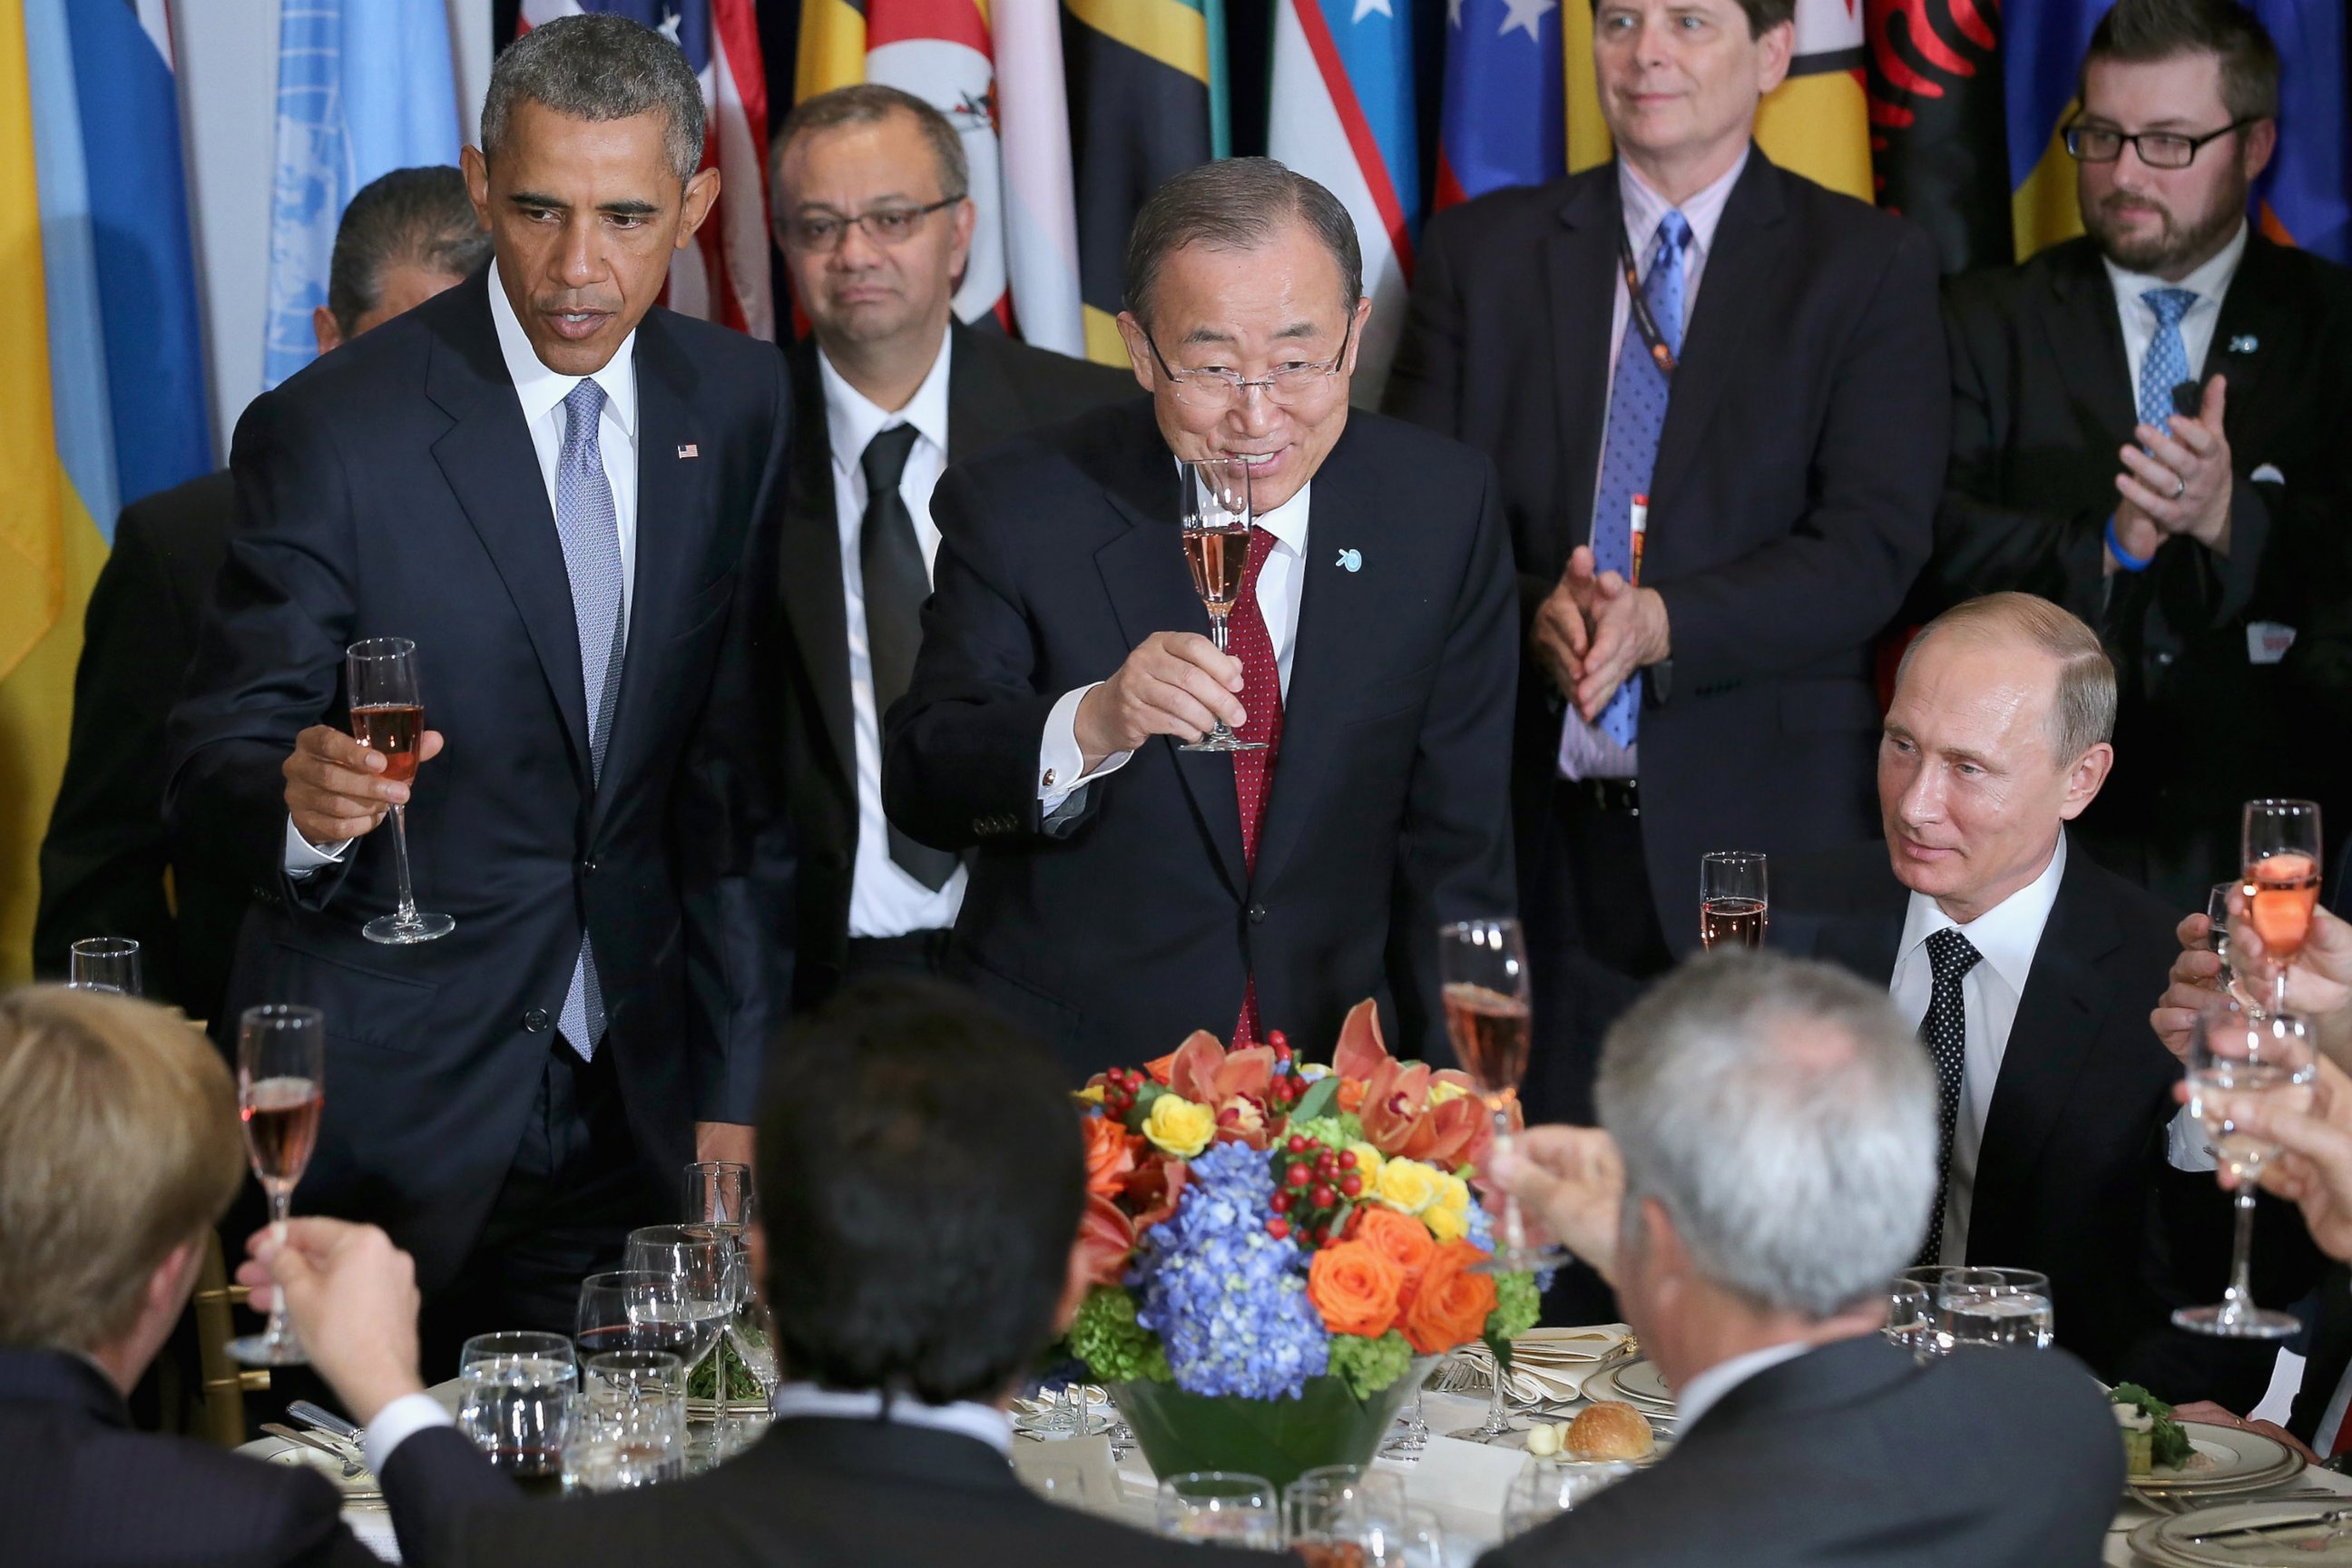 U.S. President Barack Obama, United Nations Secretary-General Ban Ki-moon and Russian President Vladimir during a luncheon hosted by Ki-moon during the 70th annual UN General Assembly at the UN headquarters Sept. 28, 2015 in New York City.